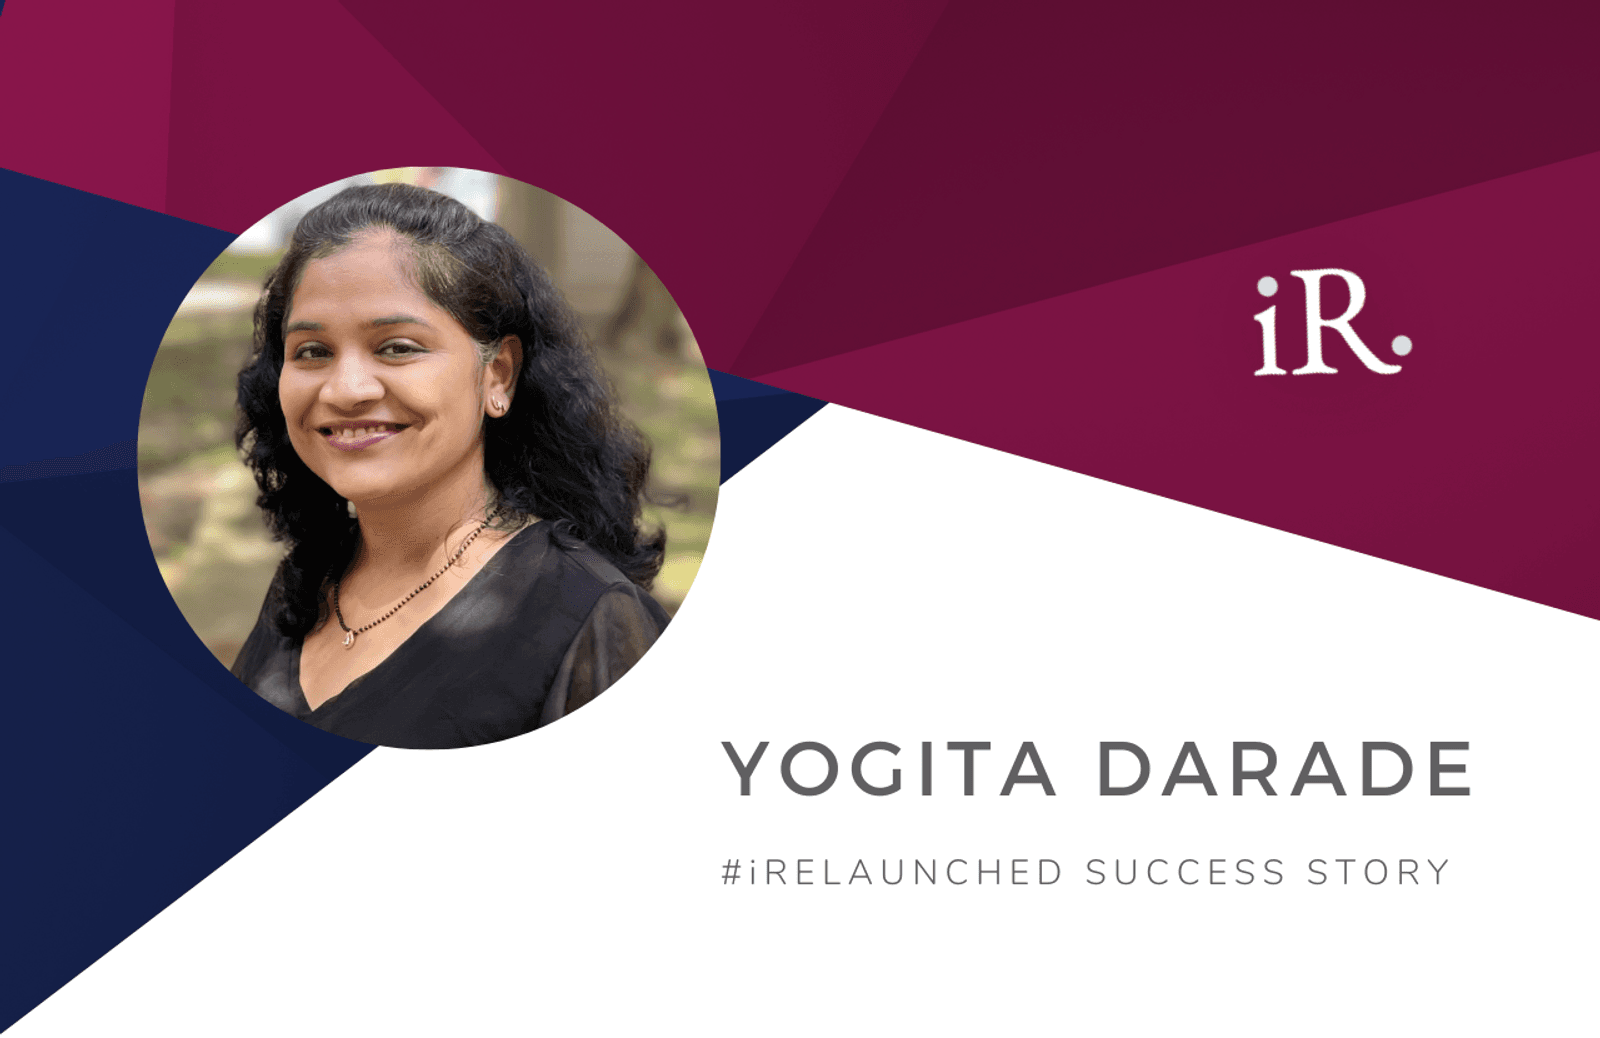 Yogita Darade's headshot and the text #iRelaunched Success Story along with the iRelaunch logo.  A navy and maroon geometric textured background intersect behind Yogita's headshot.